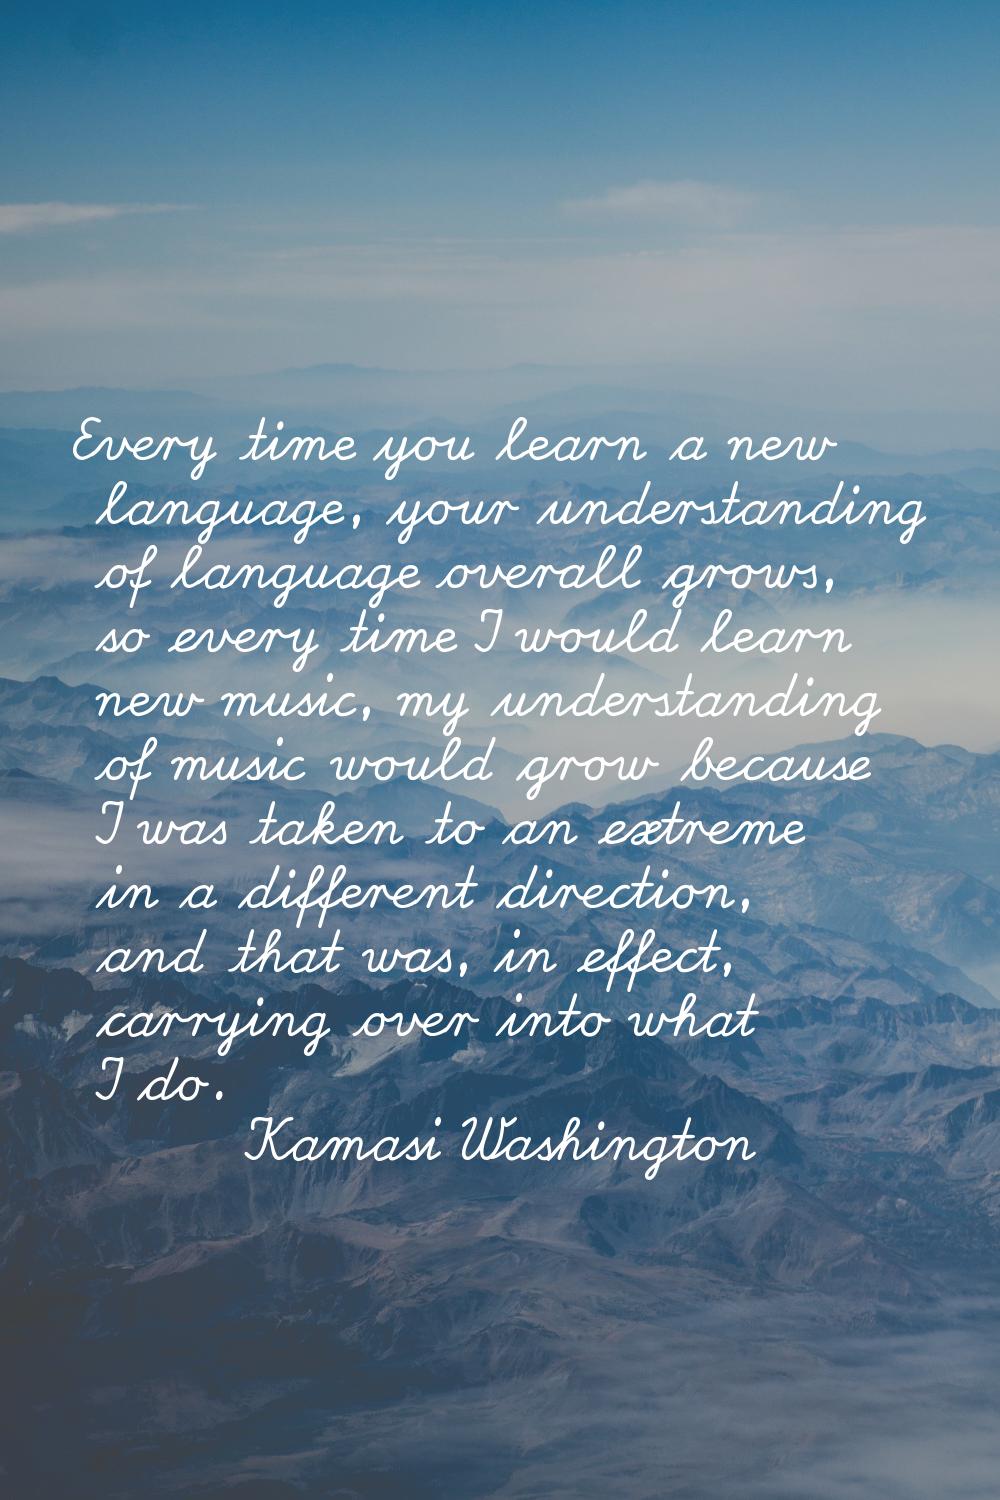 Every time you learn a new language, your understanding of language overall grows, so every time I 